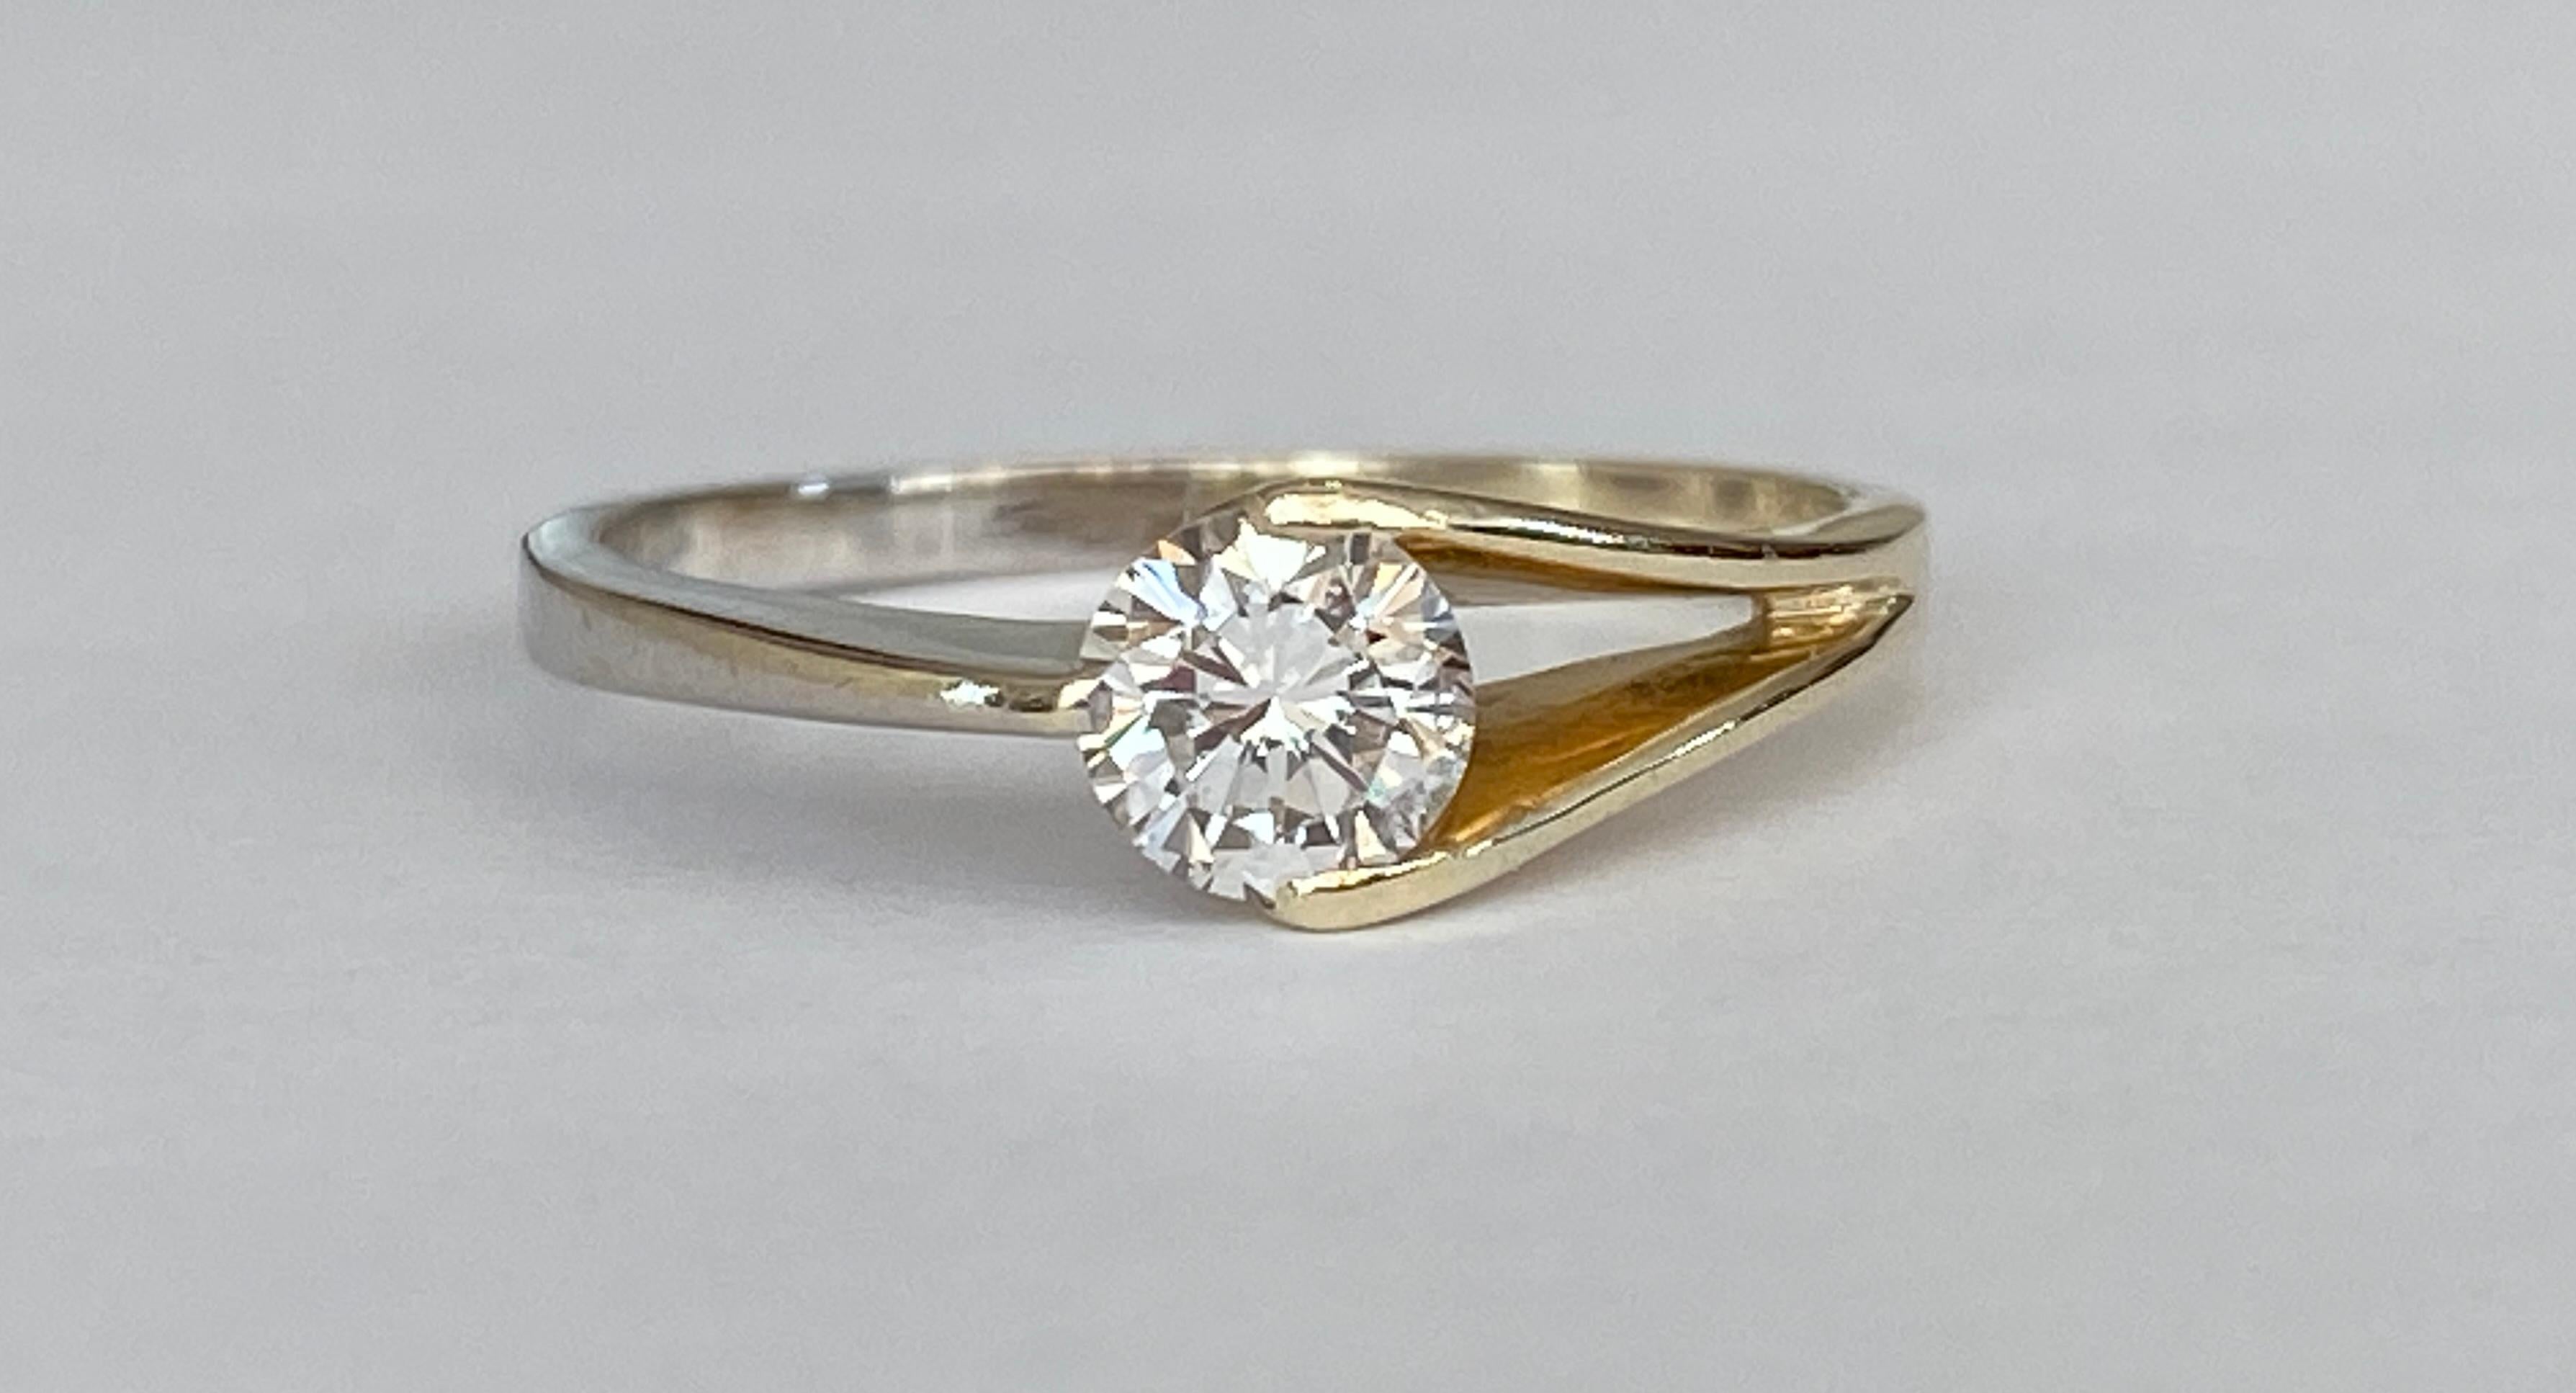 Offered in good condition is a 14 carat bi-color solitaire ring with a 0.48ct brilliant cut diamond of quality E/SI1. ALGT certificate is included. Report number is 93812603.
Grade: 14KT (quality mark is worn, professionally tested)
Weight: 2.36